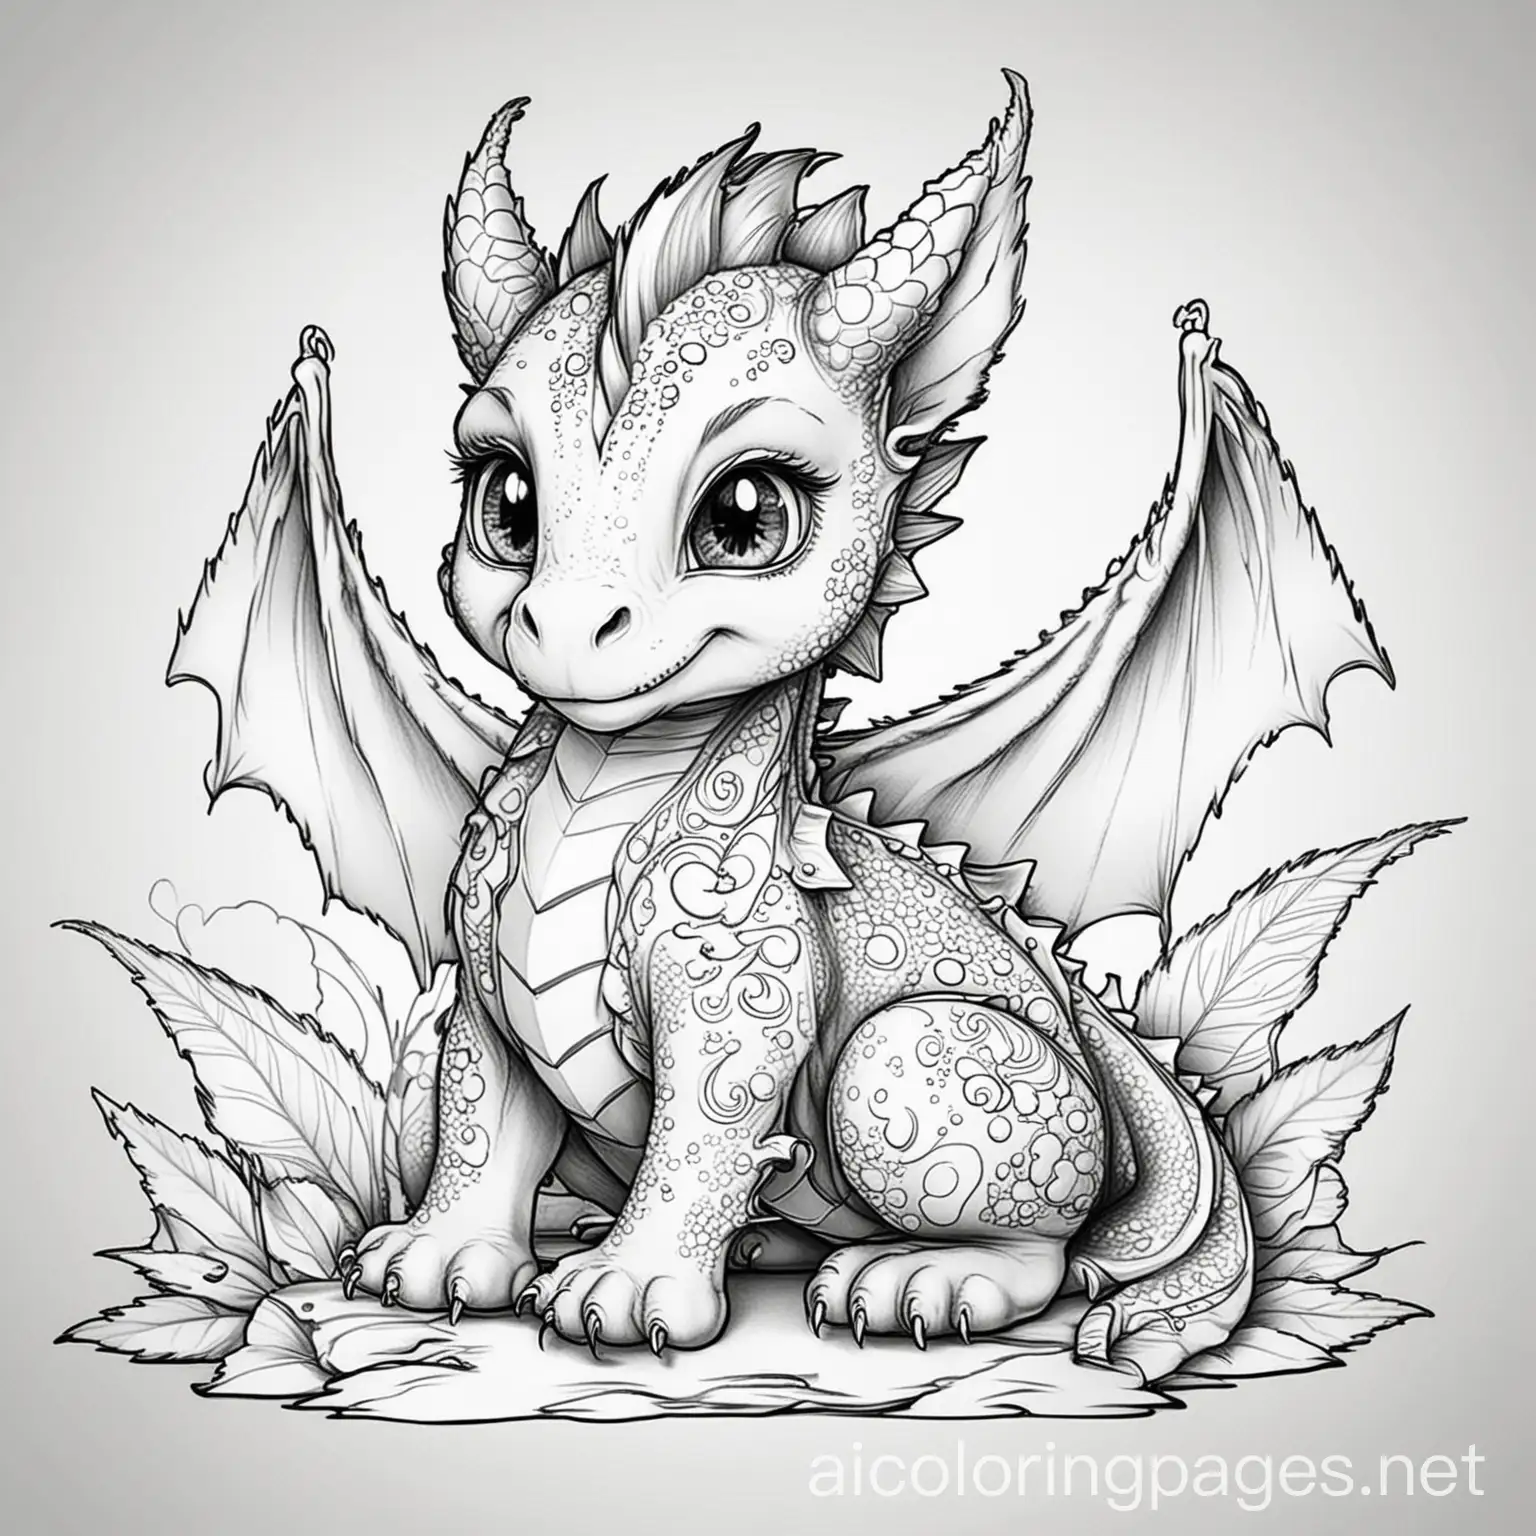 Baby-Dragon-Coloring-Pages-for-Adults-and-Kids